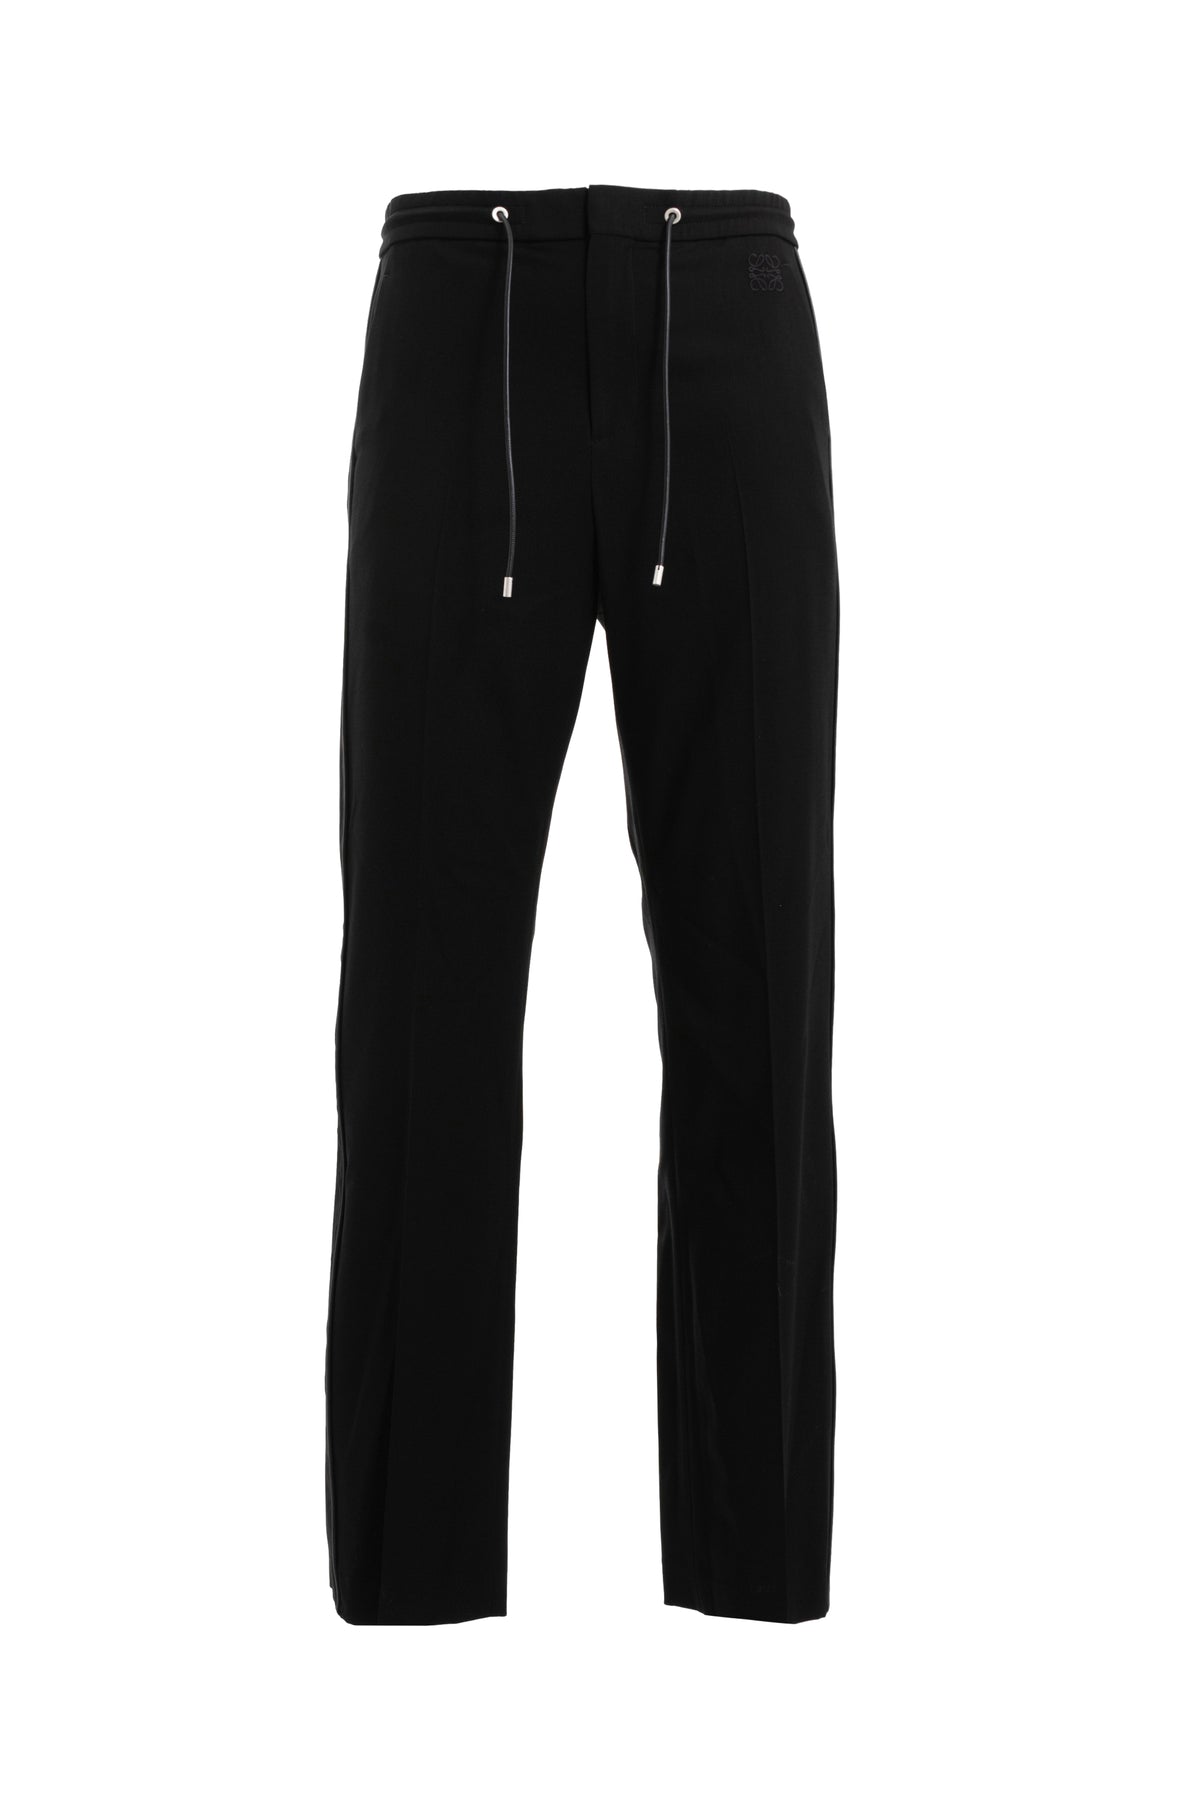 TRACKSUIT TROUSERS / BLK